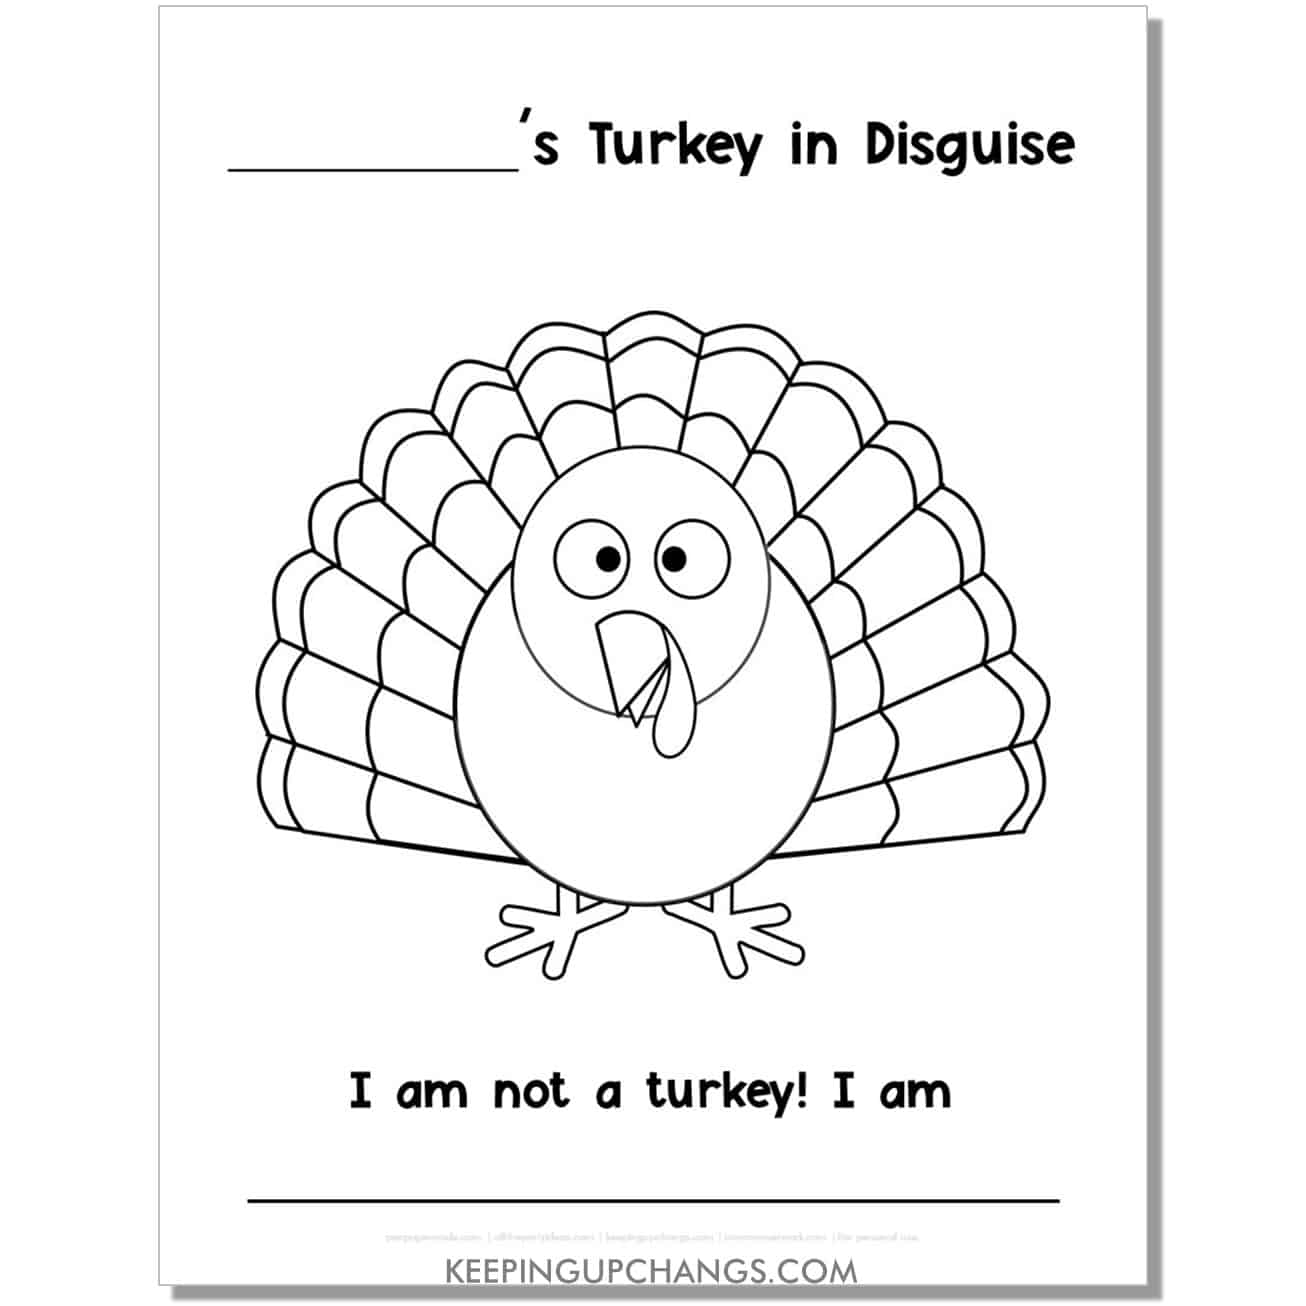 Free Turkey Disguise Project Templates [MOST POPULAR Printables!] With Blank Turkey Template